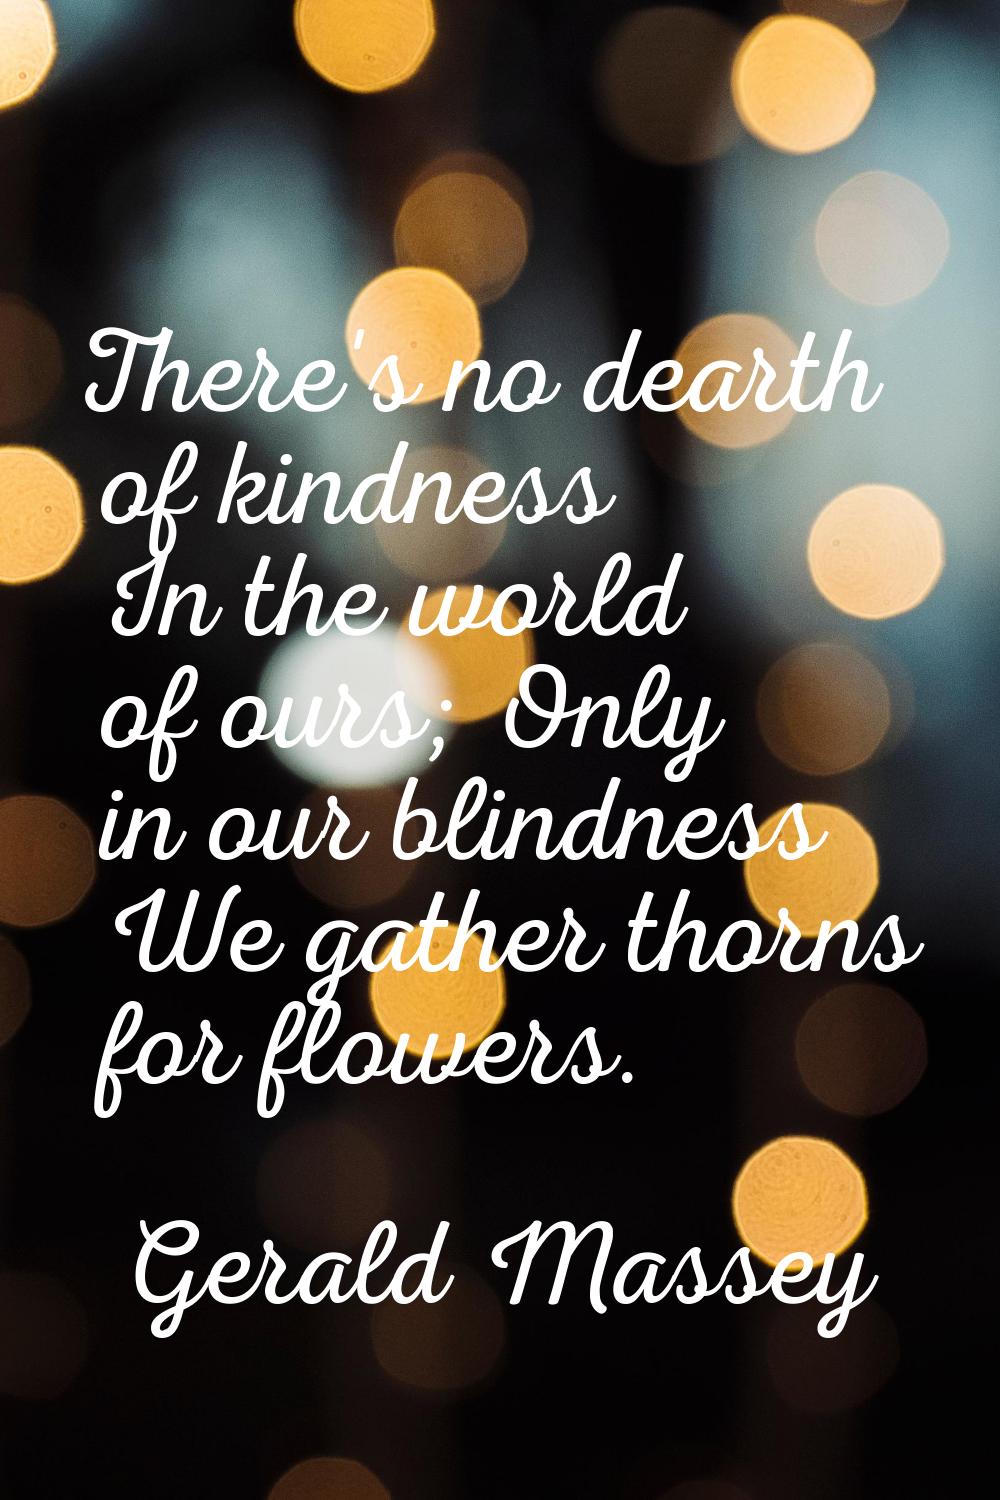 There's no dearth of kindness In the world of ours; Only in our blindness We gather thorns for flow